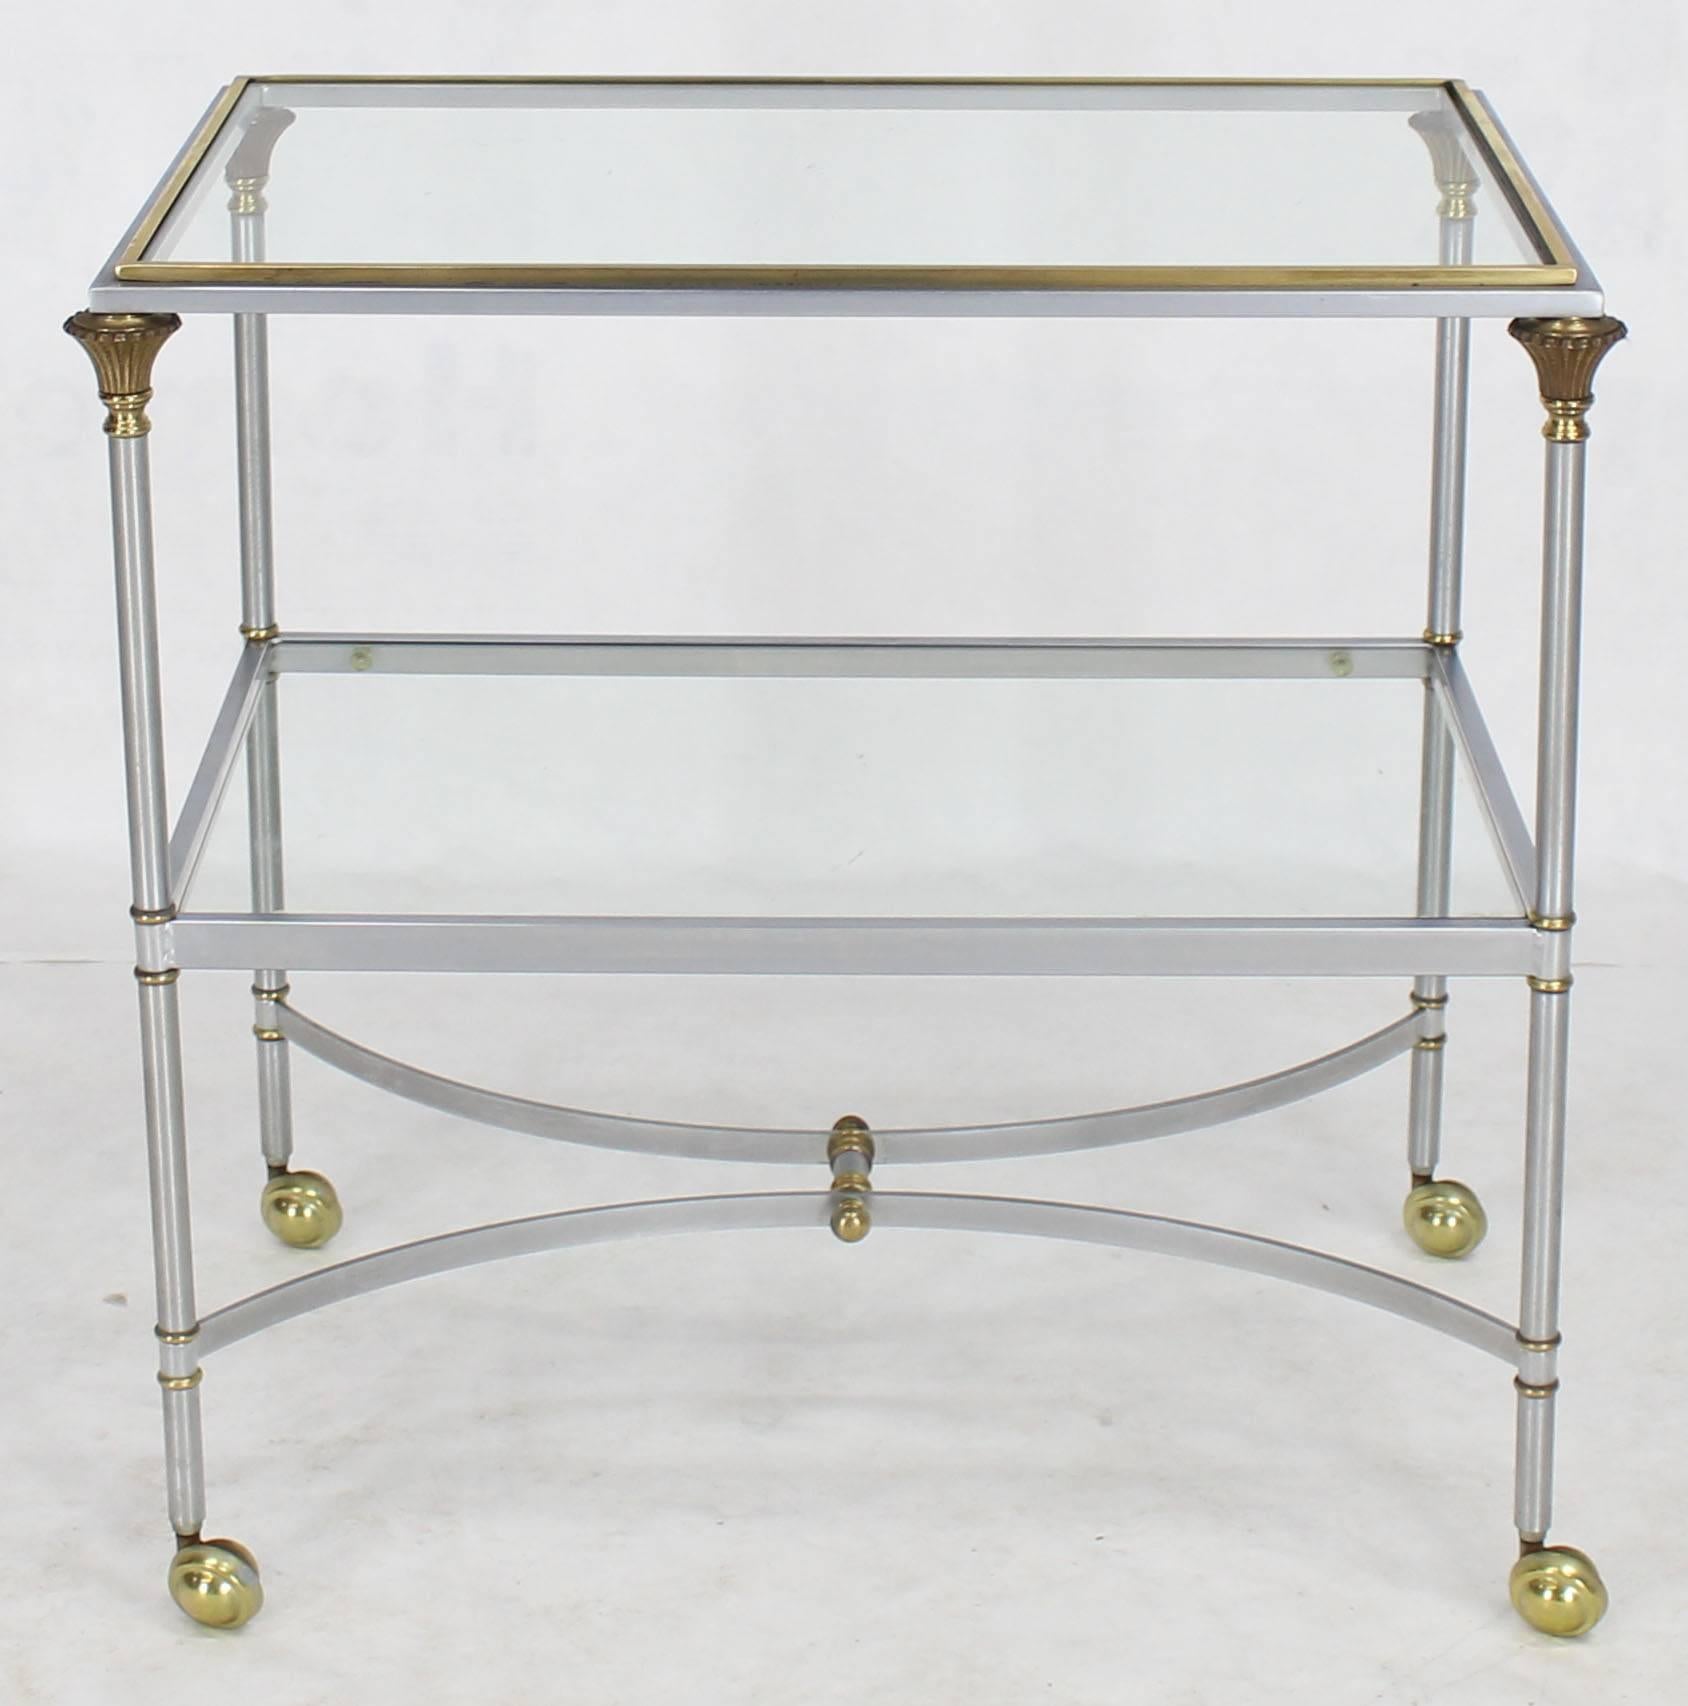 Brushed chrome brass finials glass shelves serving cart side table on wheels.